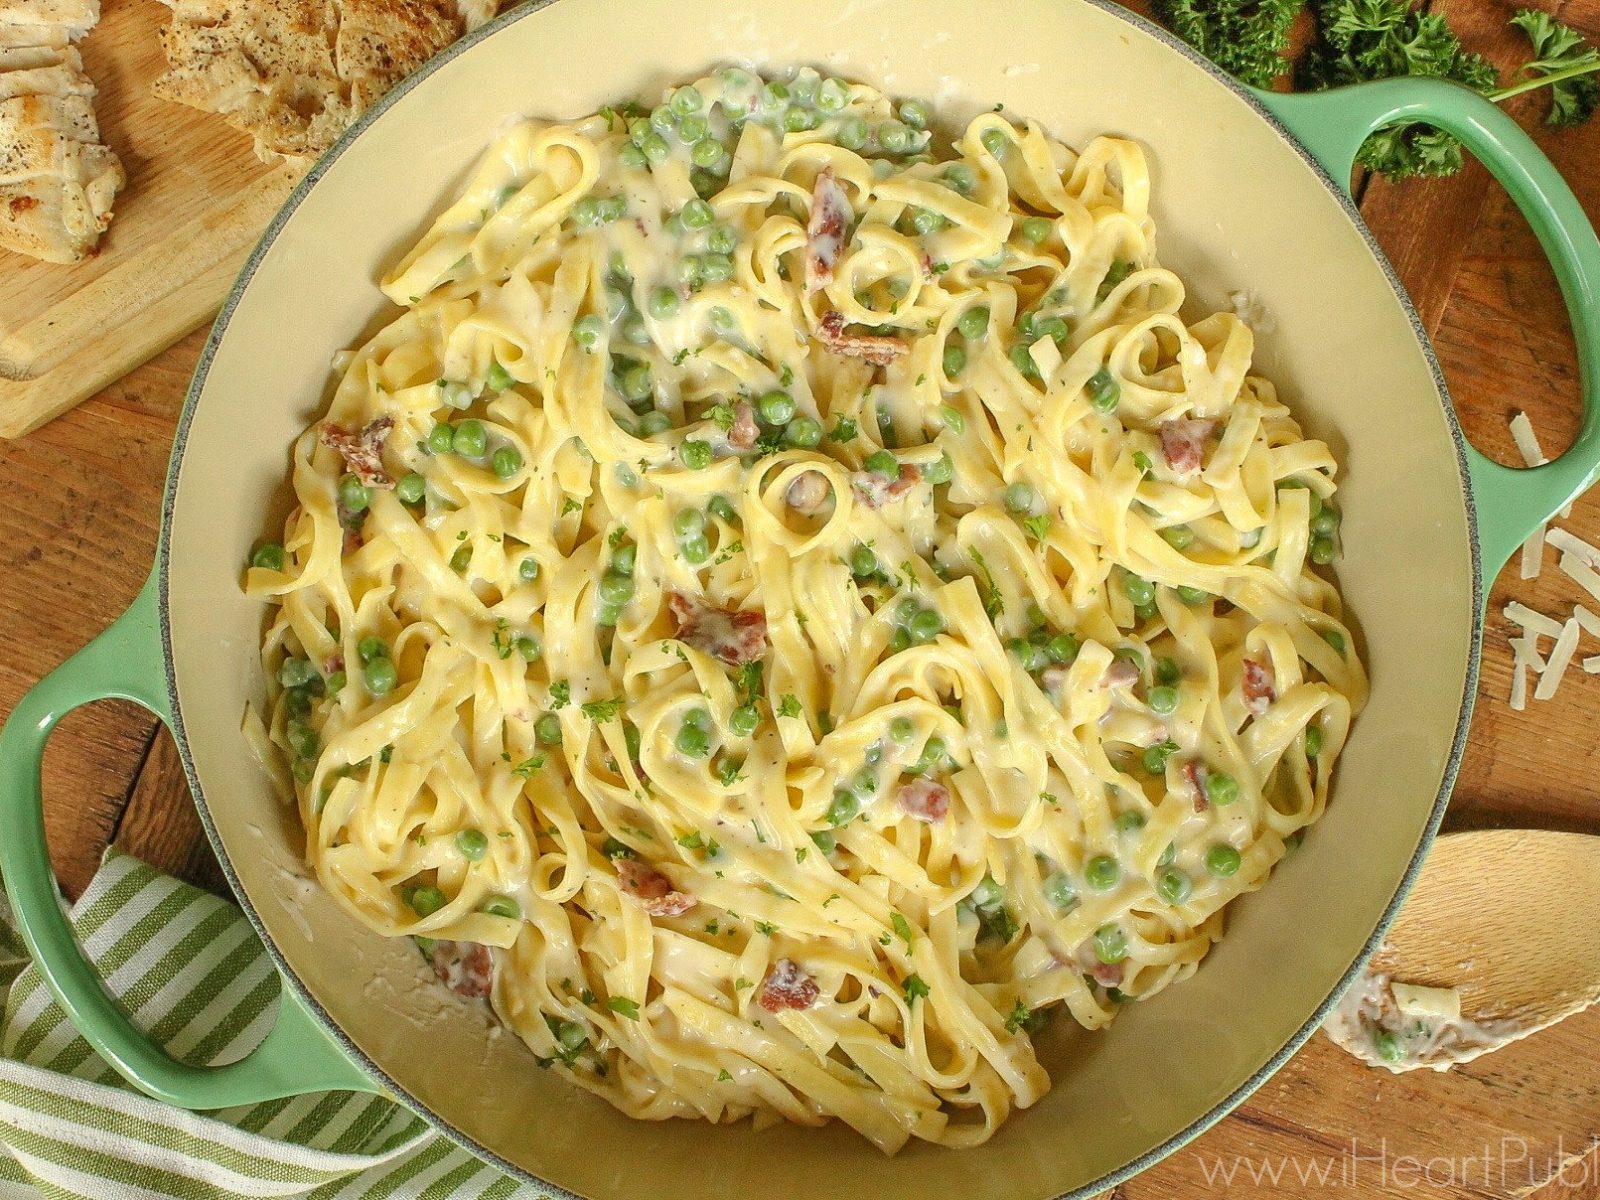 Ranch Fettuccini Alfredo with Bacon – Easy Weeknight Meal With Ronzoni Homestyle Pasta (Save NOW At Publix!)